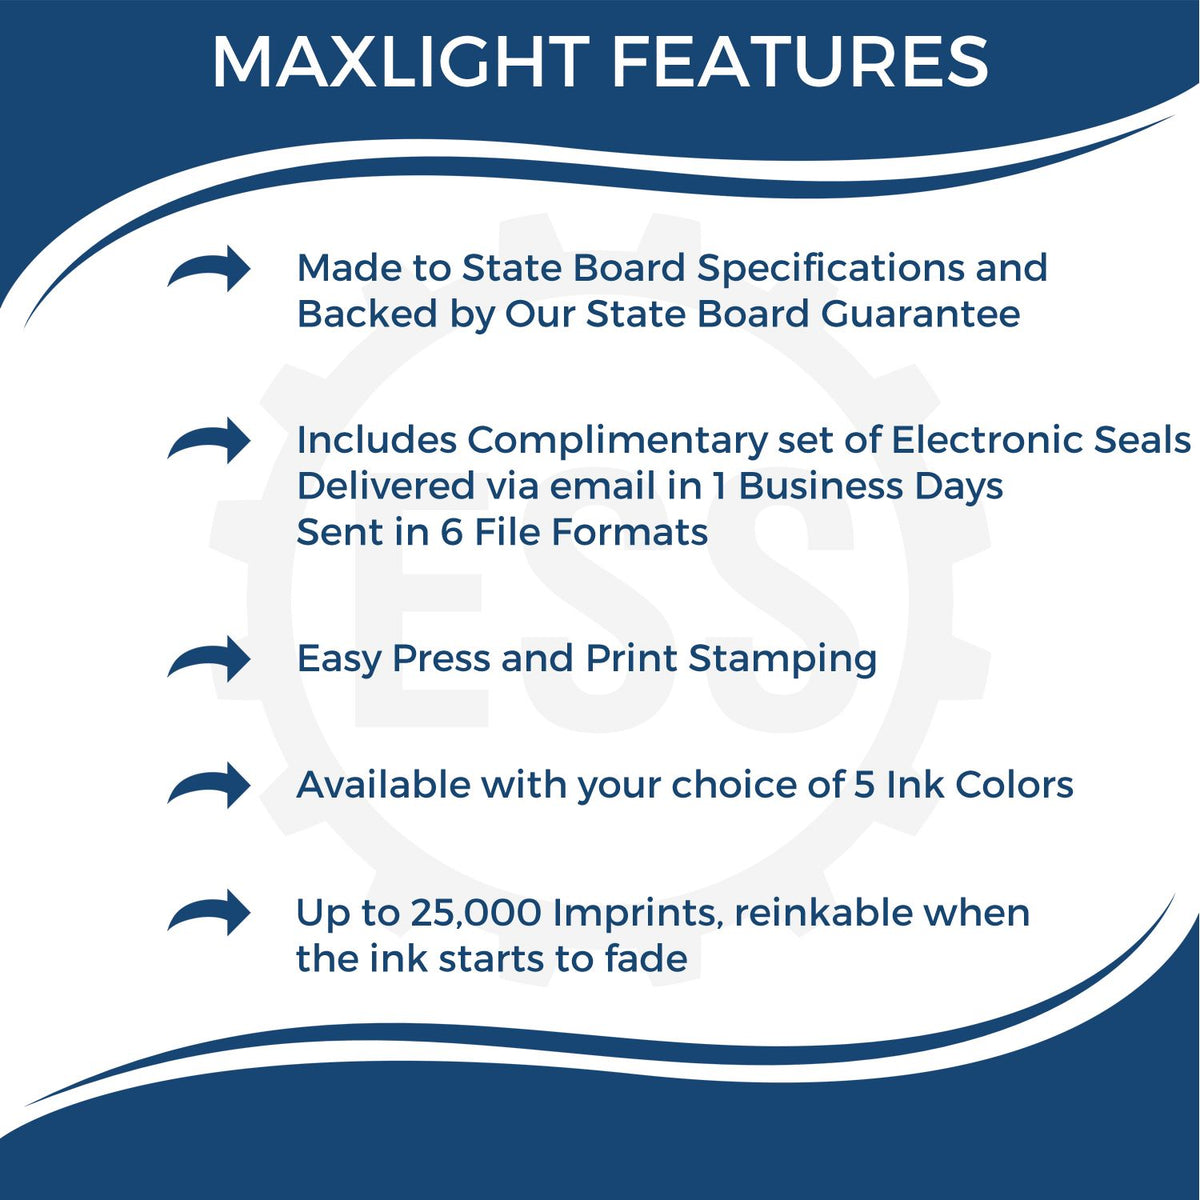 A picture of an infographic highlighting the selling points for the Premium MaxLight Pre-Inked Utah Geology Stamp